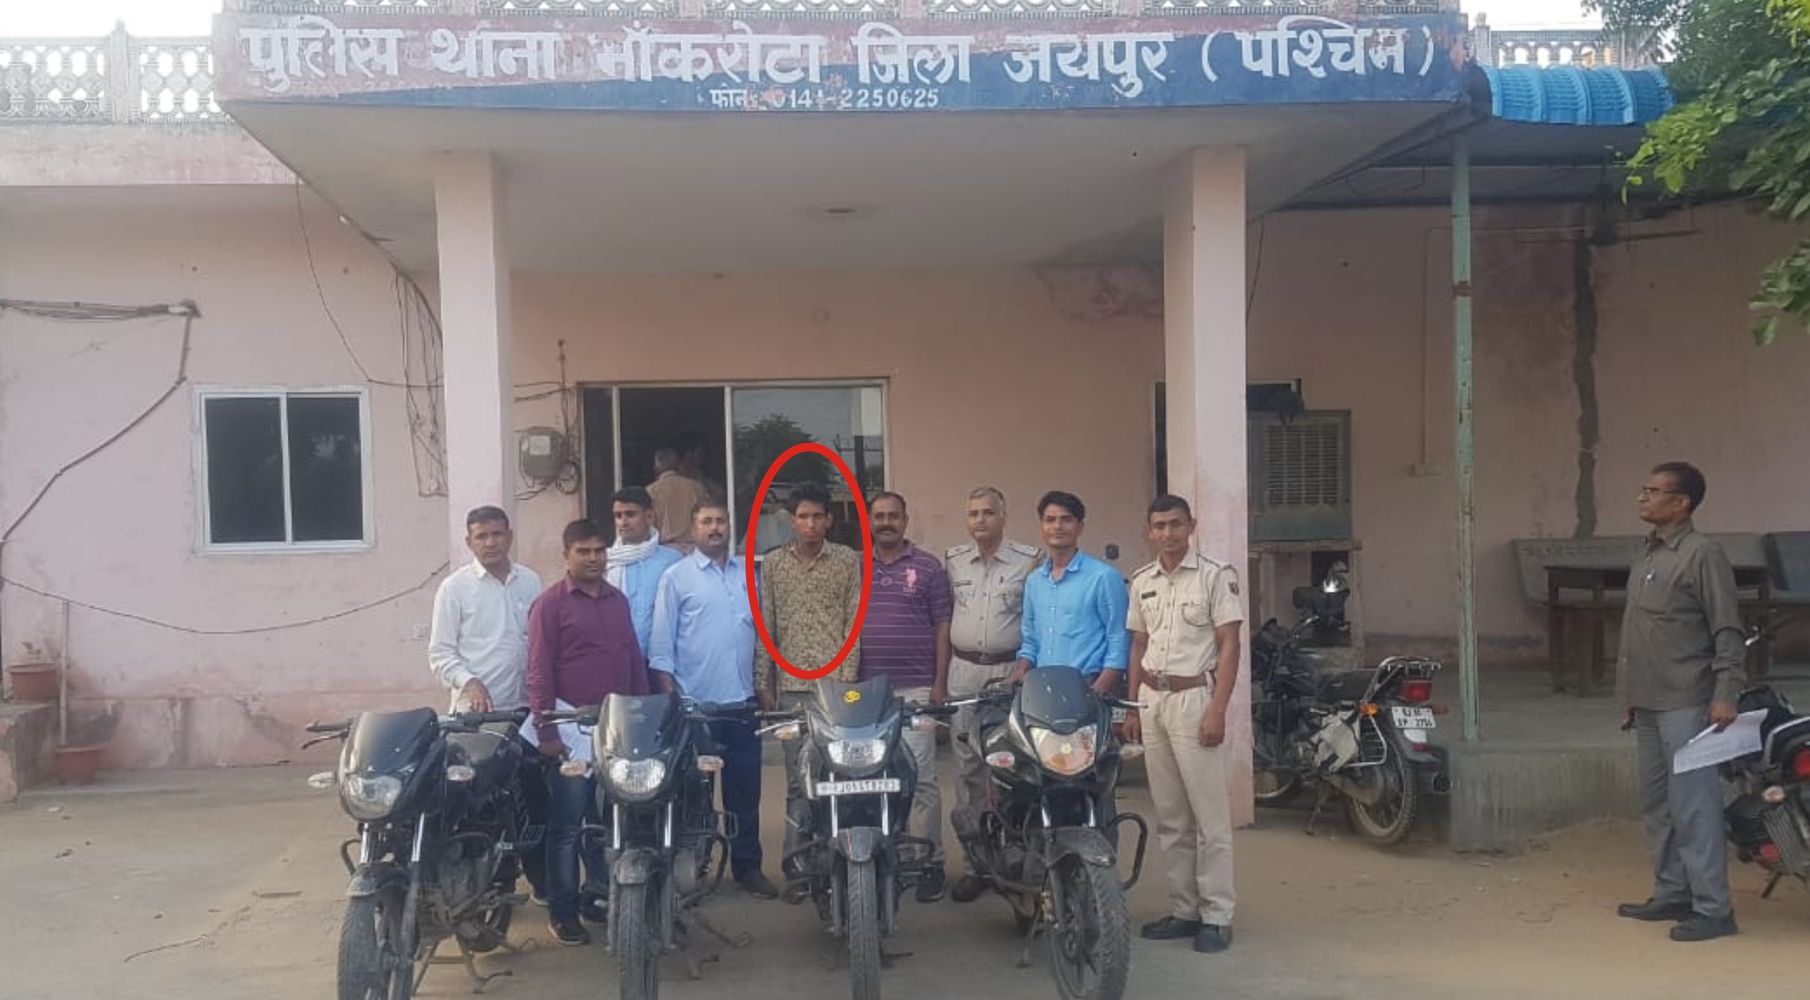 Vicious vehicle thief arrested in Bhankarota